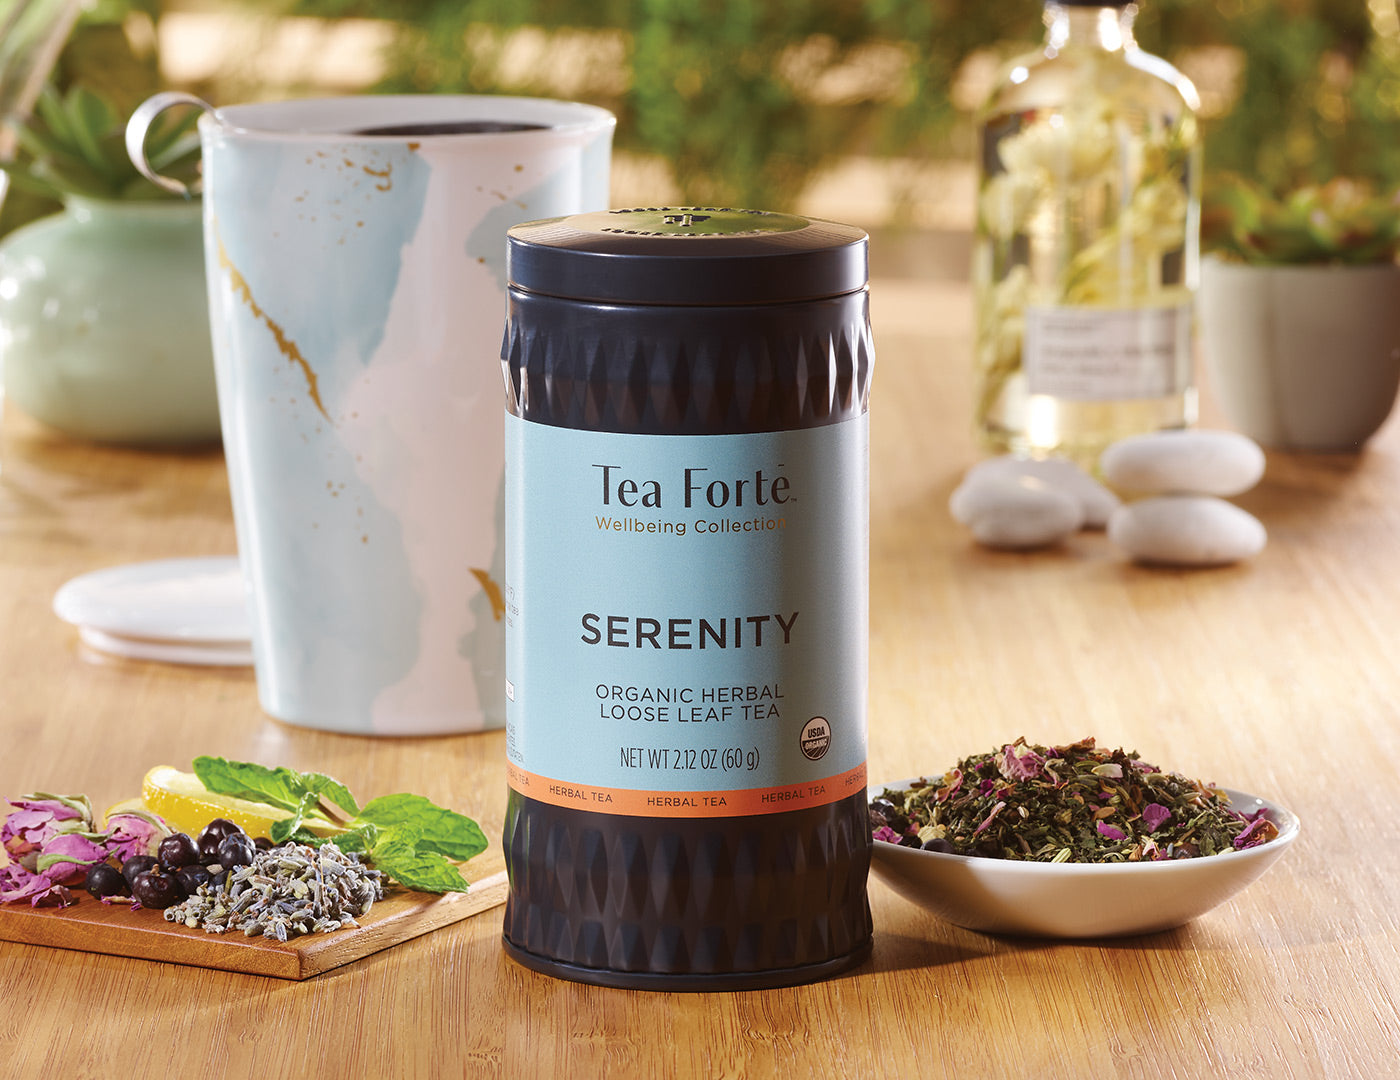 Serenity tea in a canister of loose tea